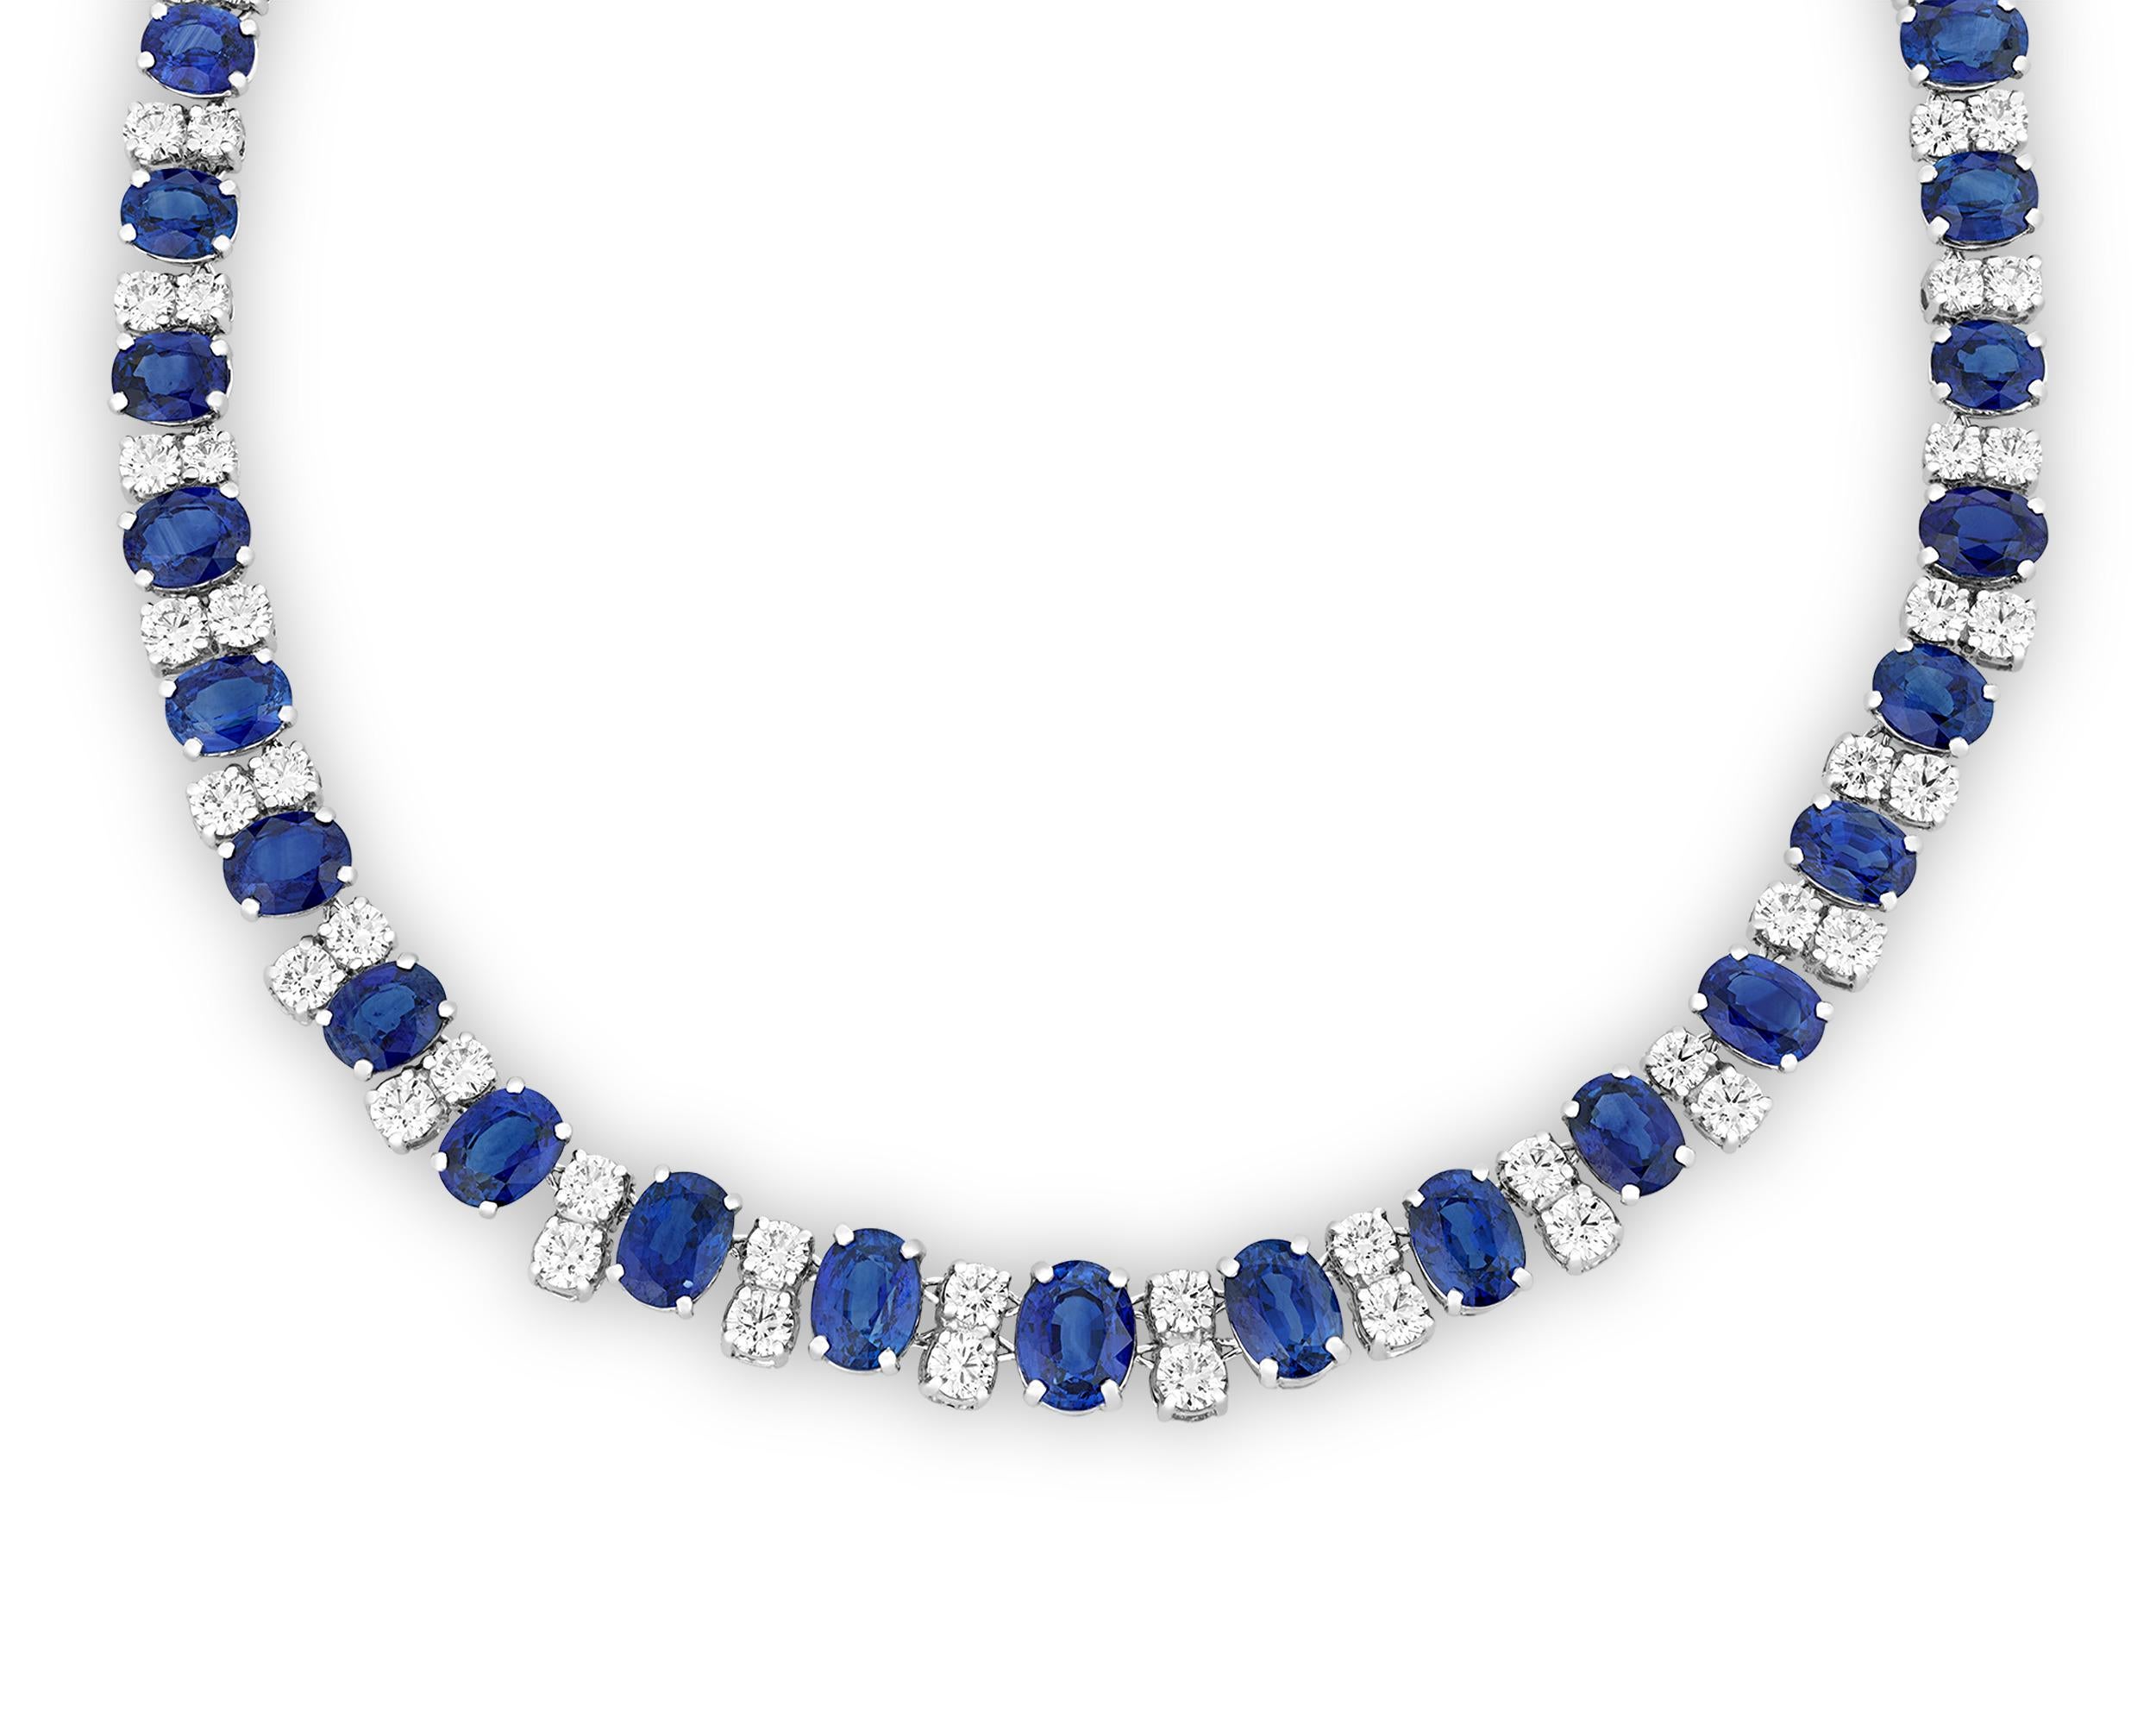 This stunning sapphire necklace by famed American jeweler Oscar Heyman is exemplary of the house's highest standards. The 42 oval-cut Ceylon sapphires in the graduated strand are perfectly matched, each displaying the ideal, highly coveted blue hue